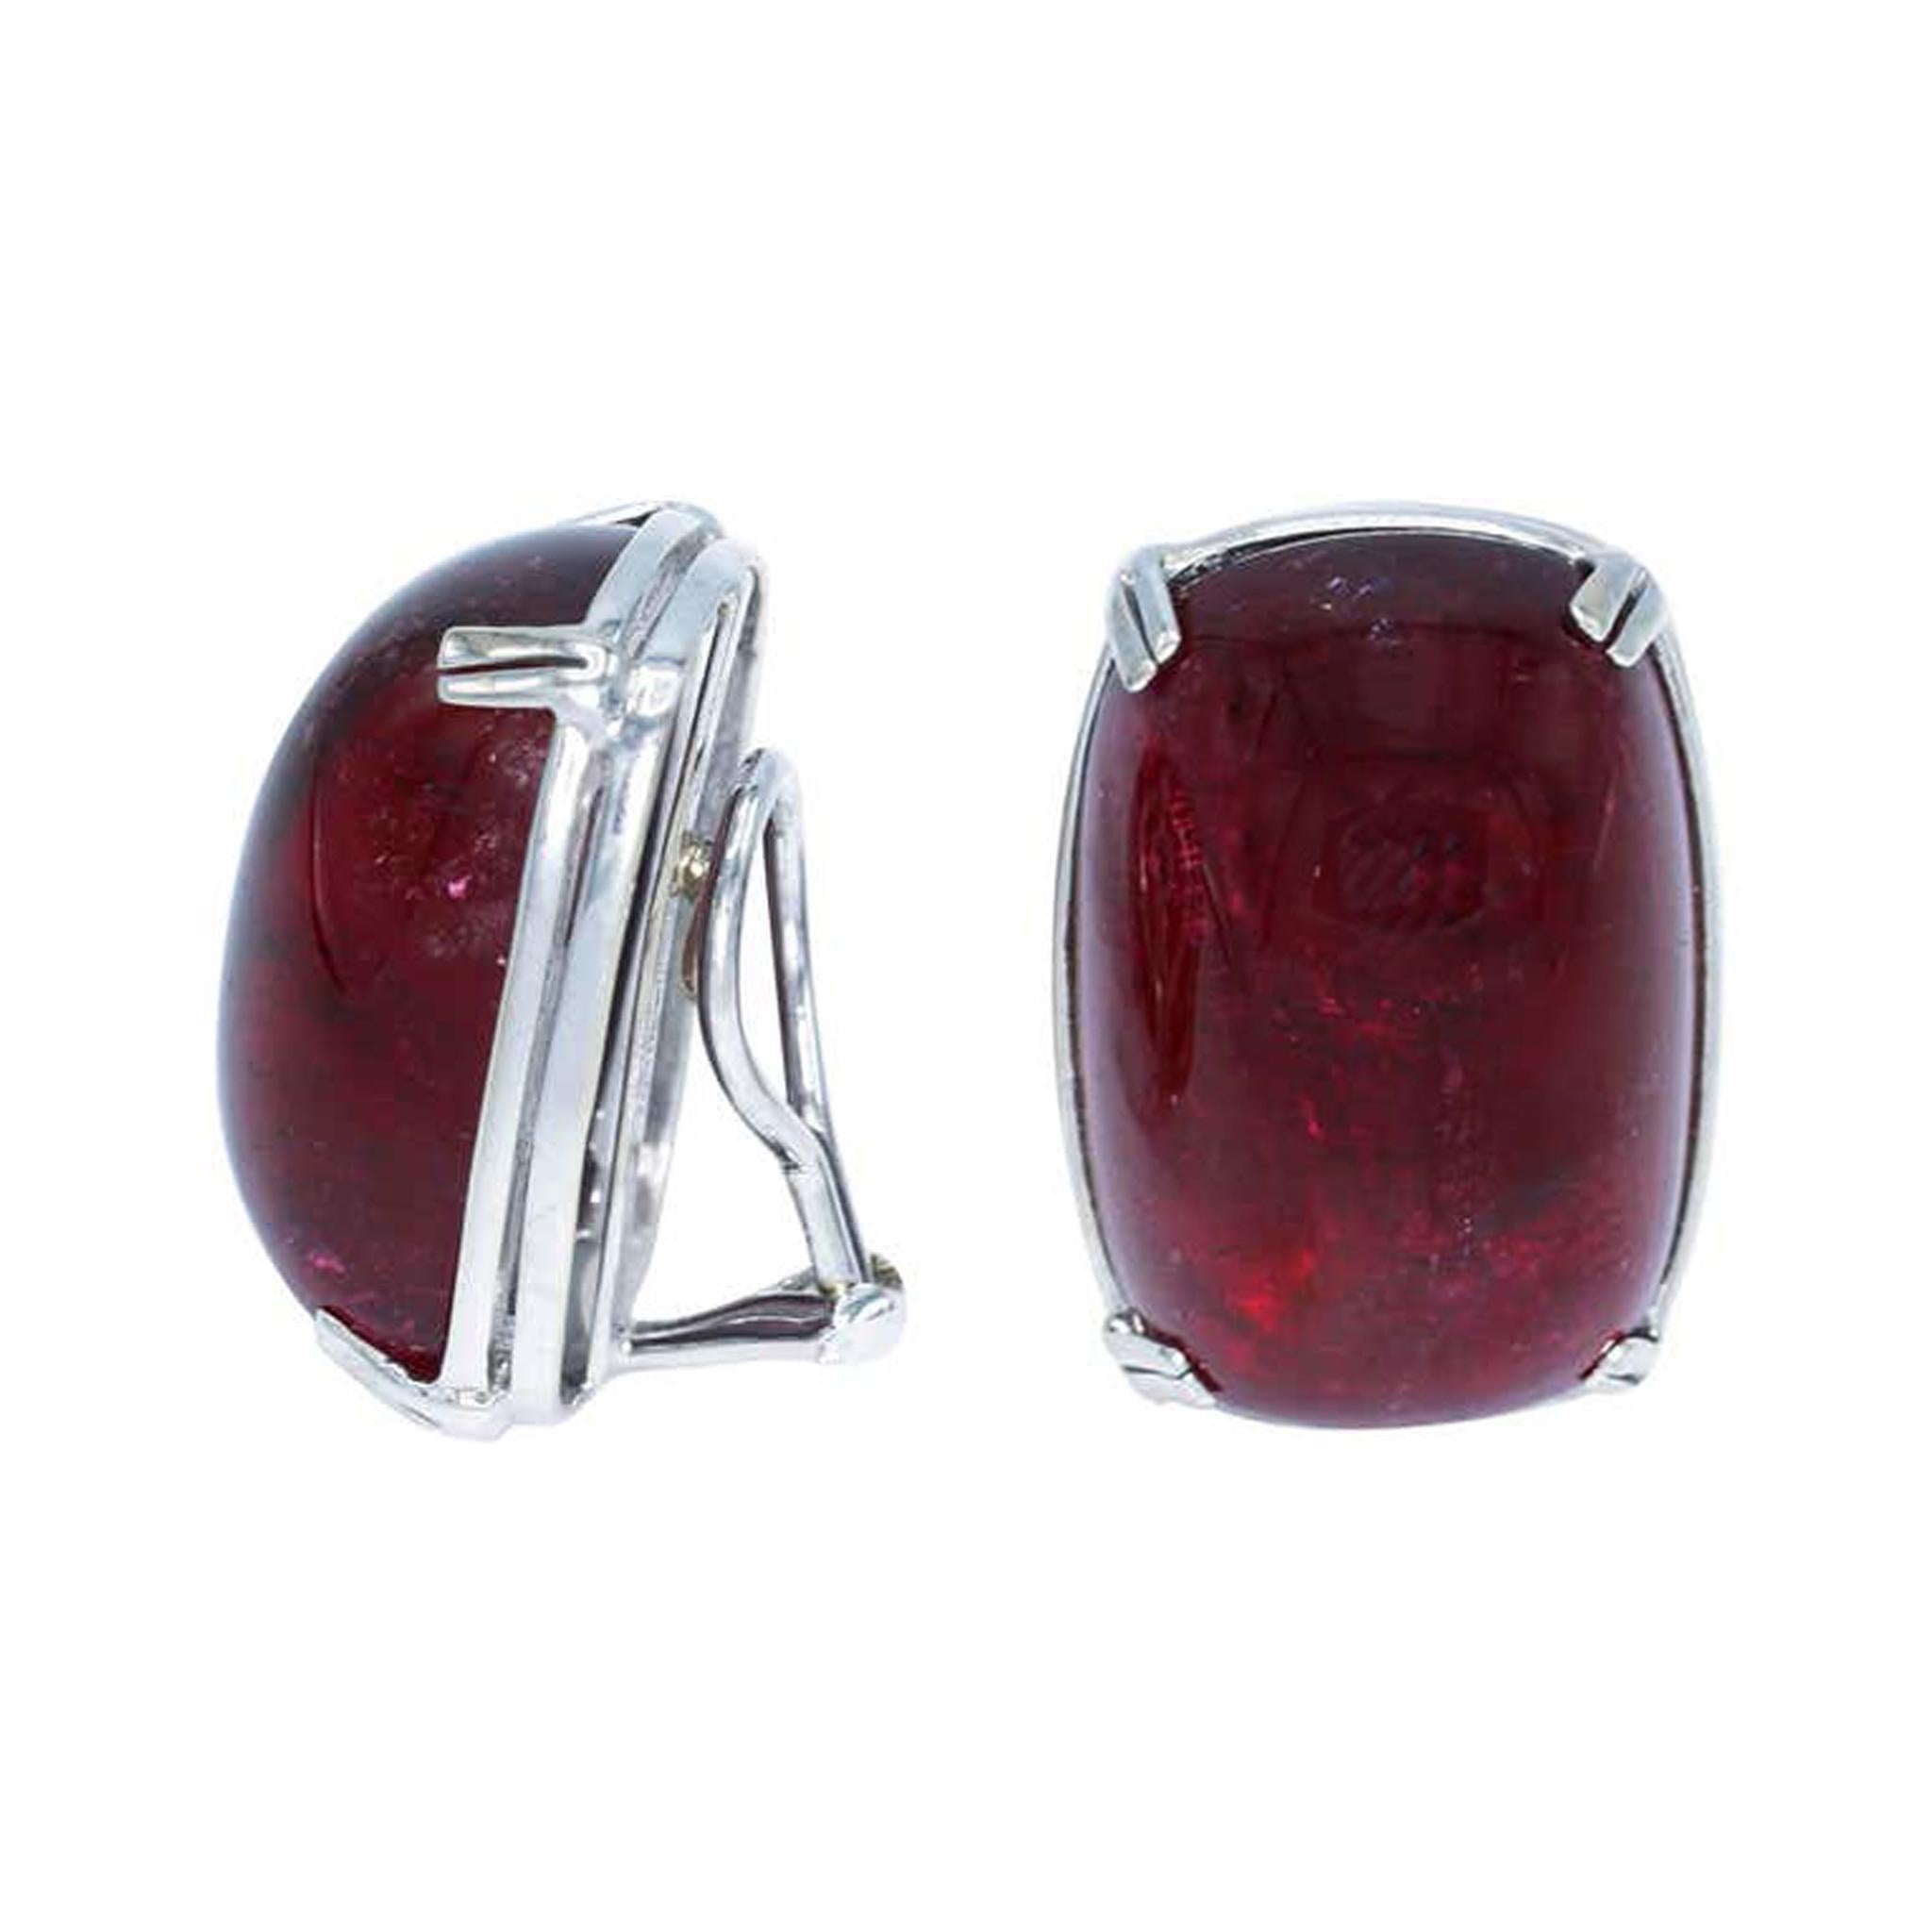 An unusual pair of large cabochon rubellite tourmaline clip-ons by the iconic jewelry house Seaman Schepps. These two large and well-matched size and color cabochon rubellite tourmalines are set in 18k white gold. They display an even deep red hue,